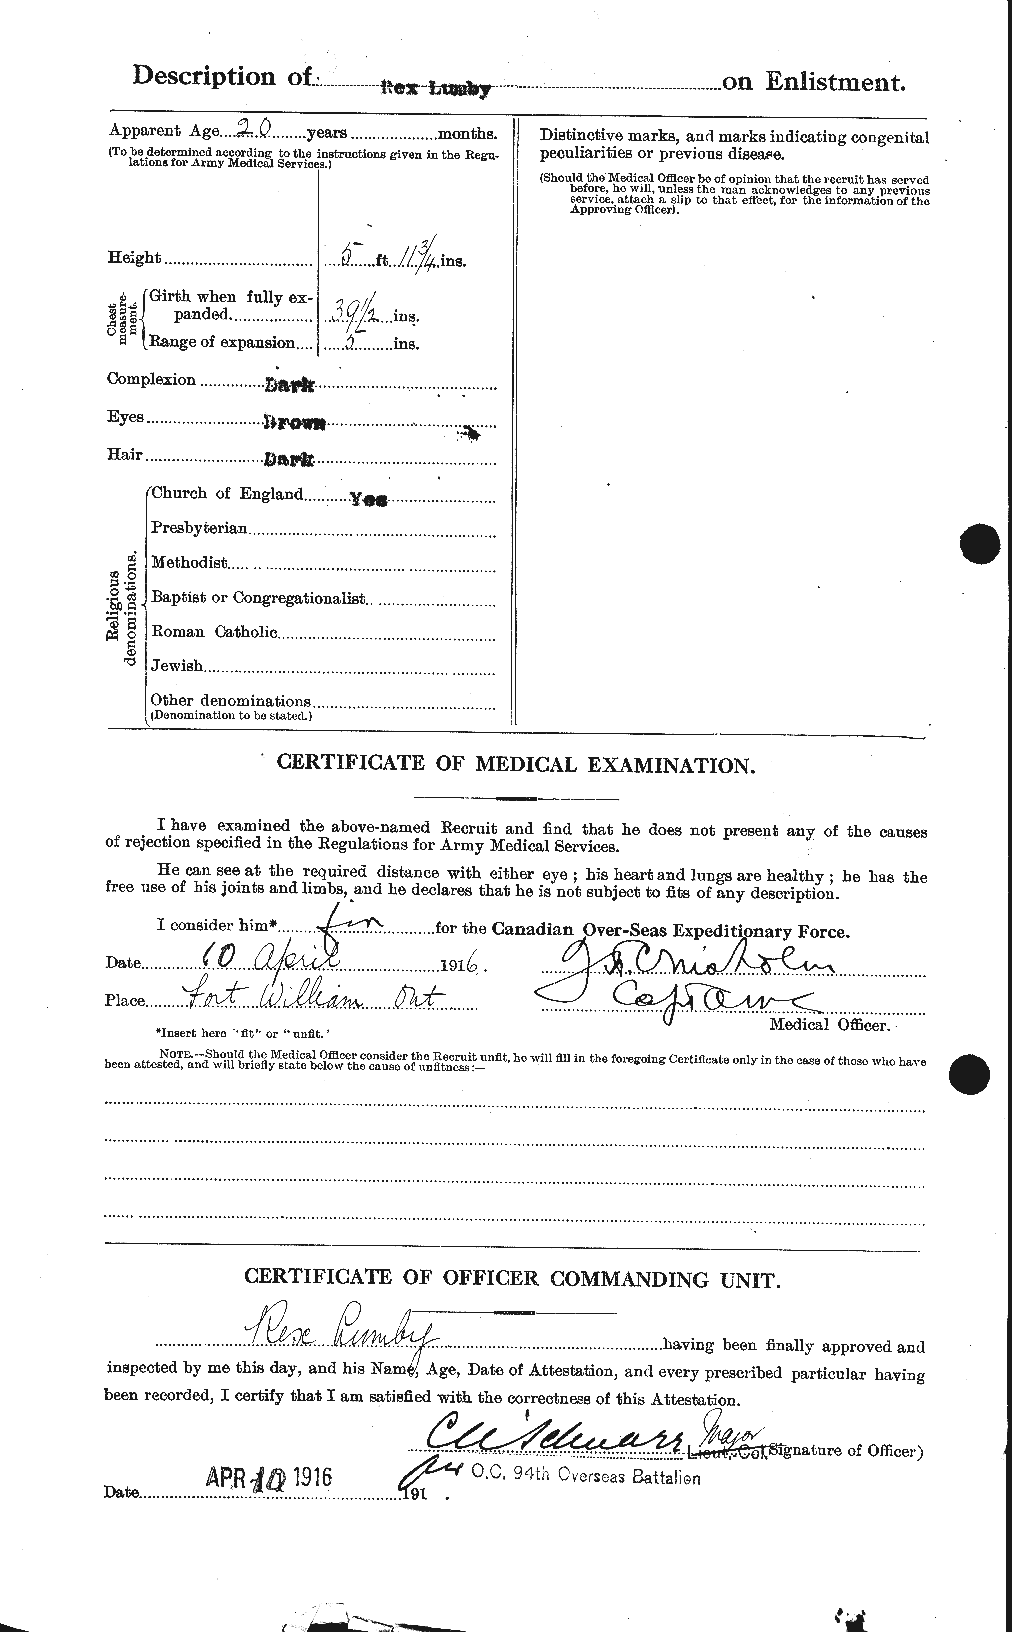 Personnel Records of the First World War - CEF 470788b